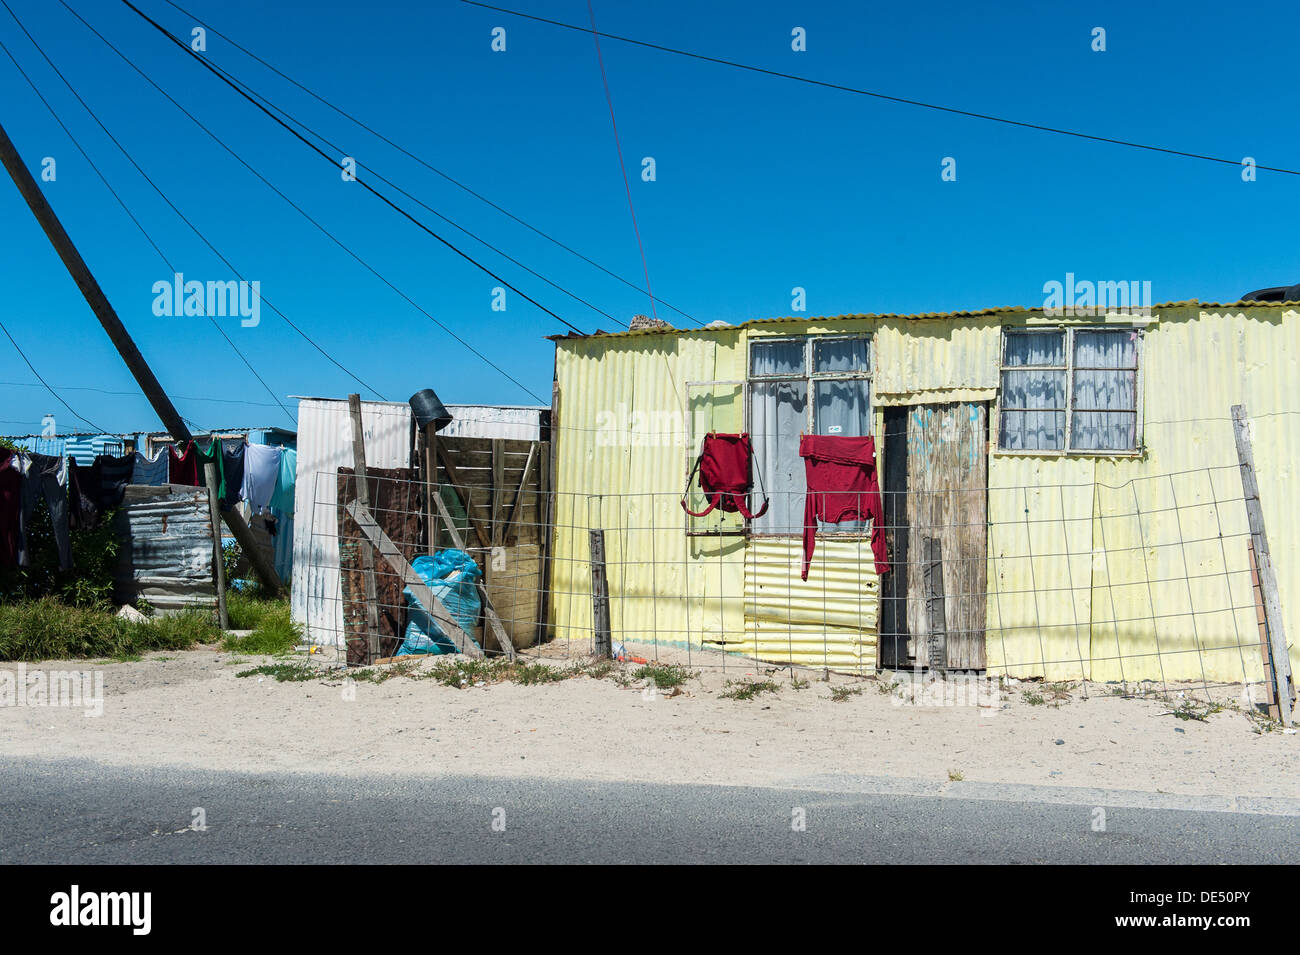 Tin shacks in Khayelitsha, a partially informal township in Cape Town, South Africa Stock Photo